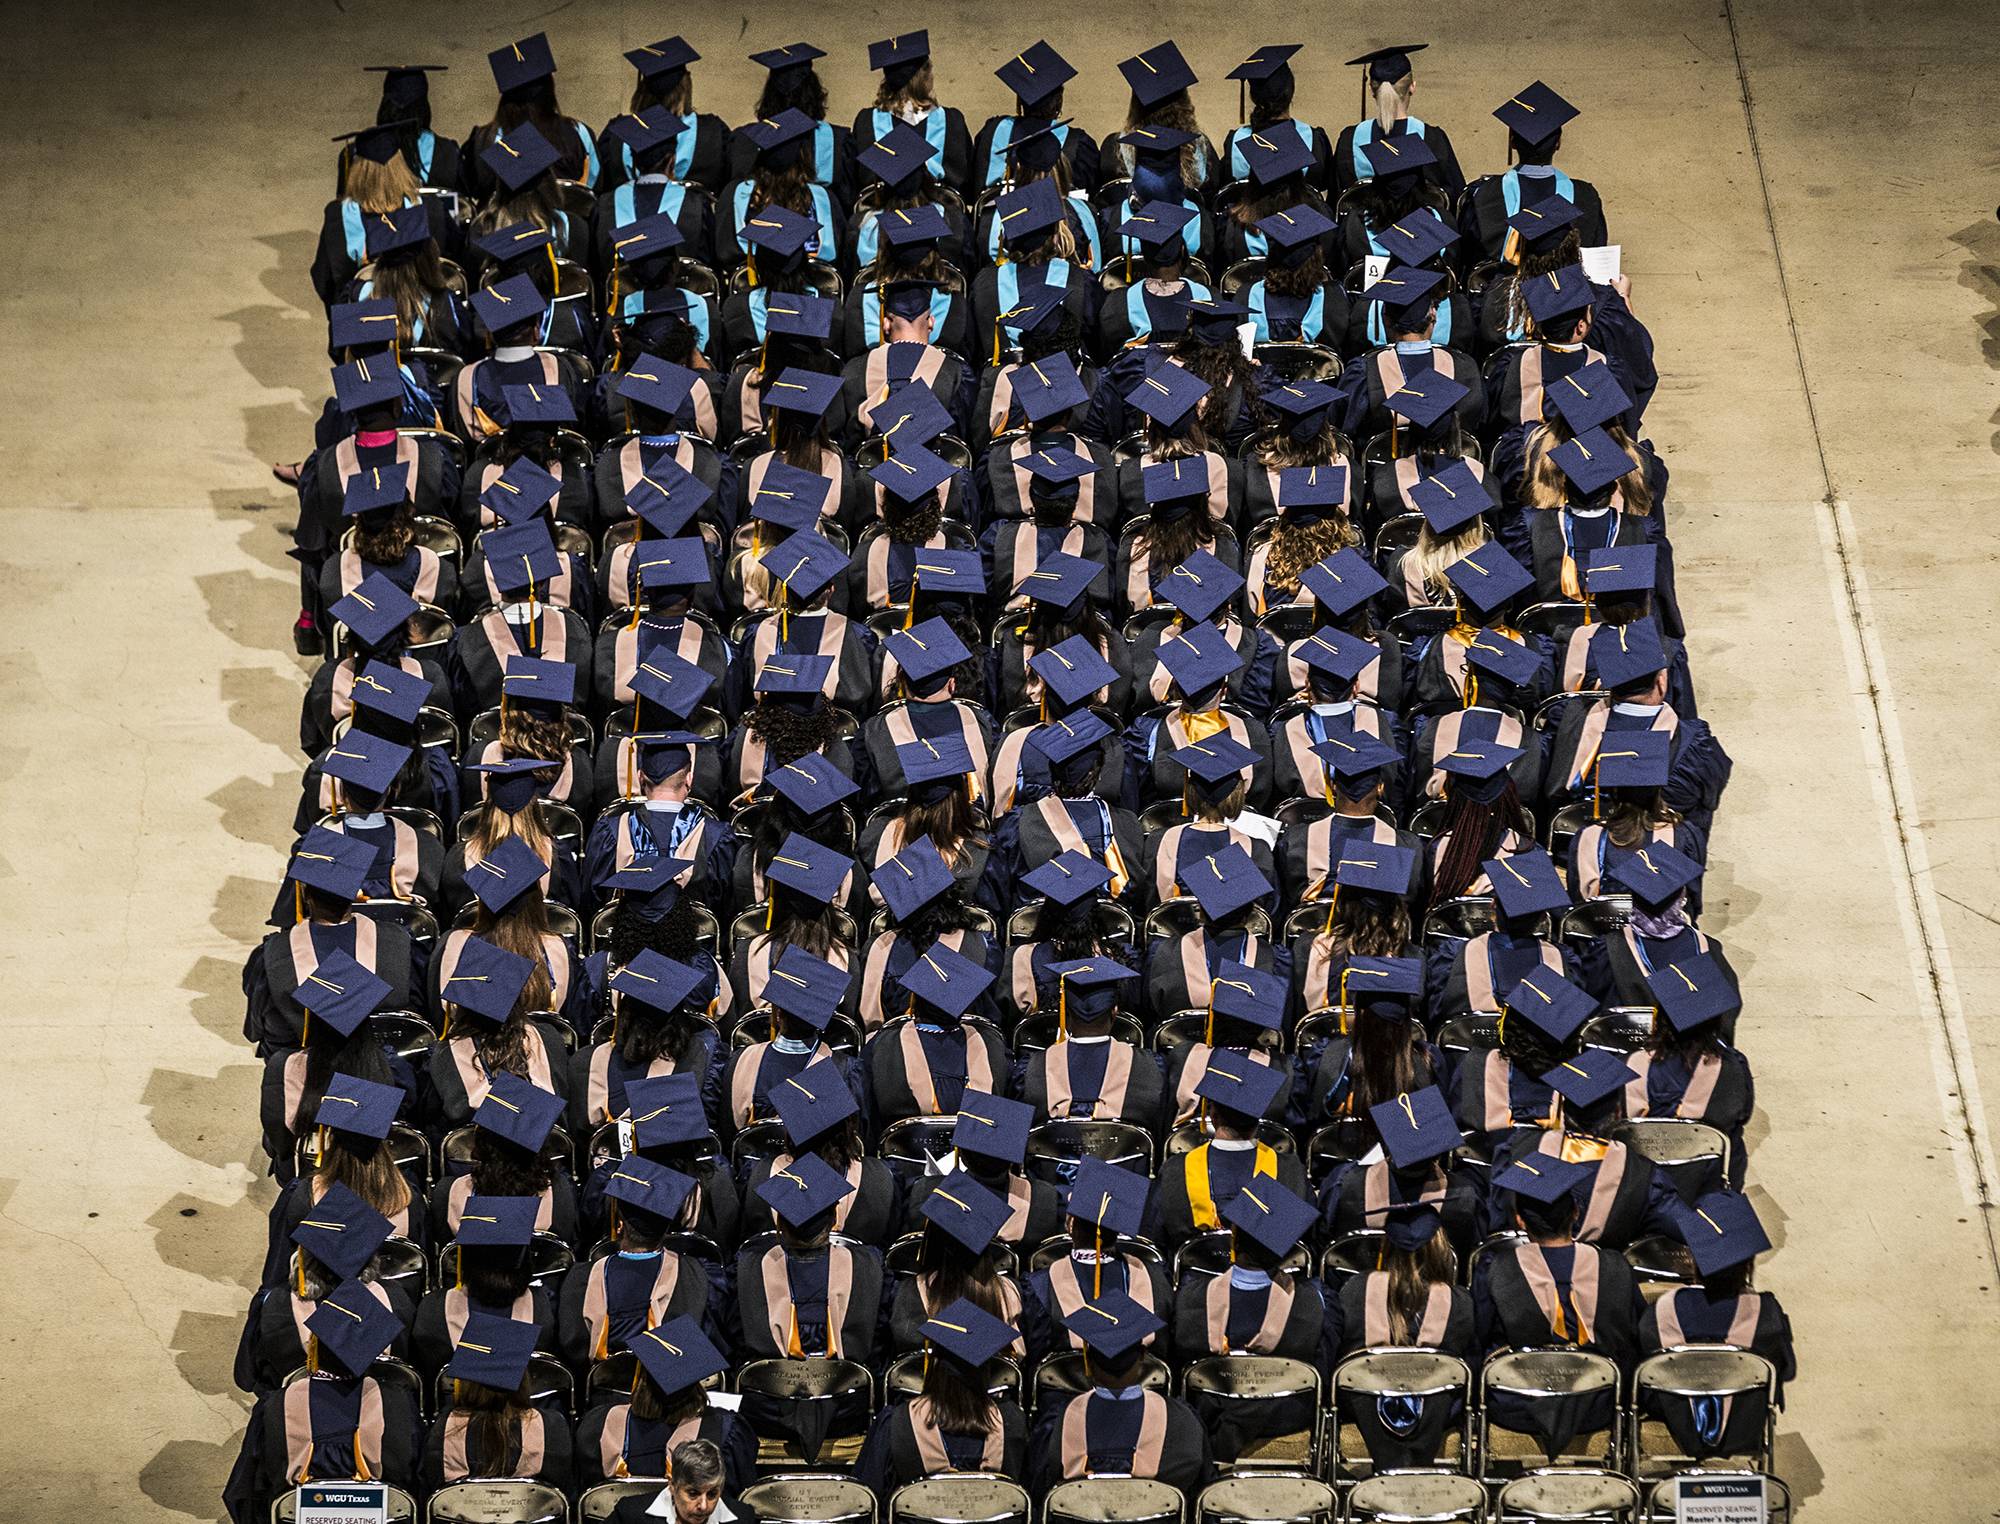 FILE- In this Sept. 30, 2017, file photo, people attend the WGU Texas annual commencement ceremony at the Frank Erwin Center in Austin, Texas. The public service loan forgiveness program was created to encourage people to take jobs to help the greater good without financially crippling themselves. These positions often require higher education but pay modest wages, such as teaching, social work, public health or law enforcement. (Ricardo B. Brazziell/Austin American-Statesman via AP, File)